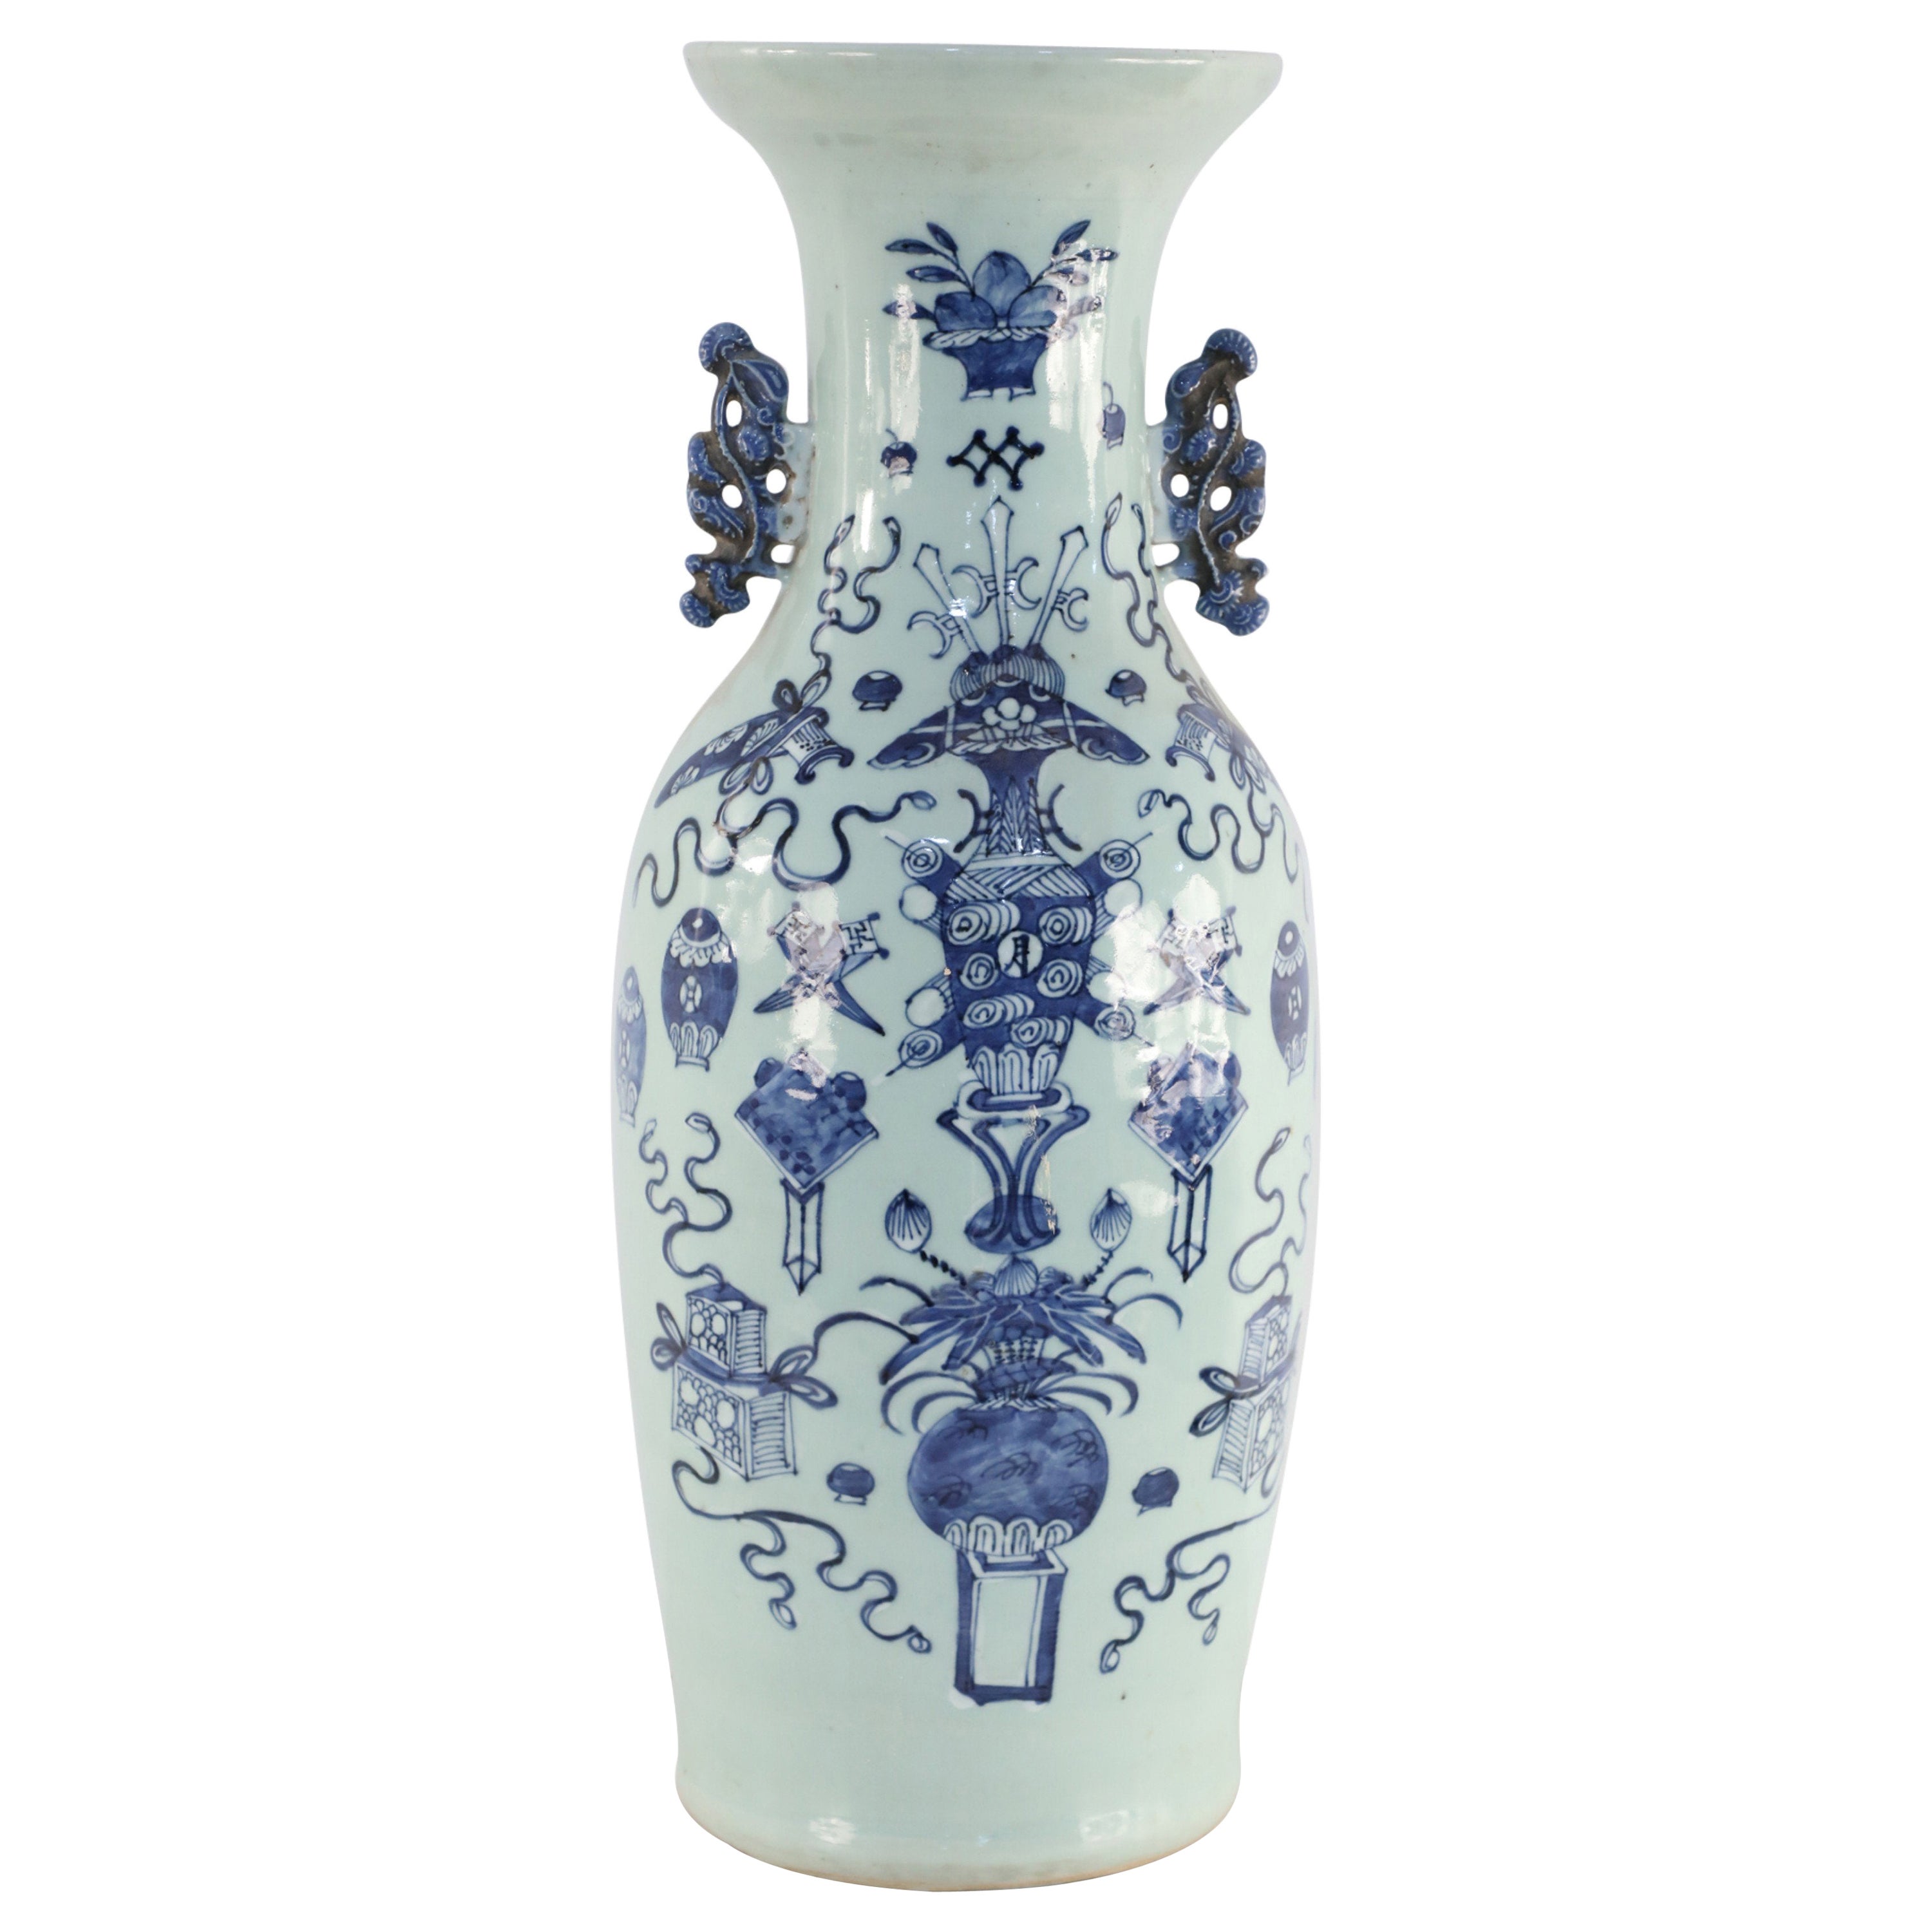 Chinese Off-White and Blue Symbol Patterned Porcelain Urn